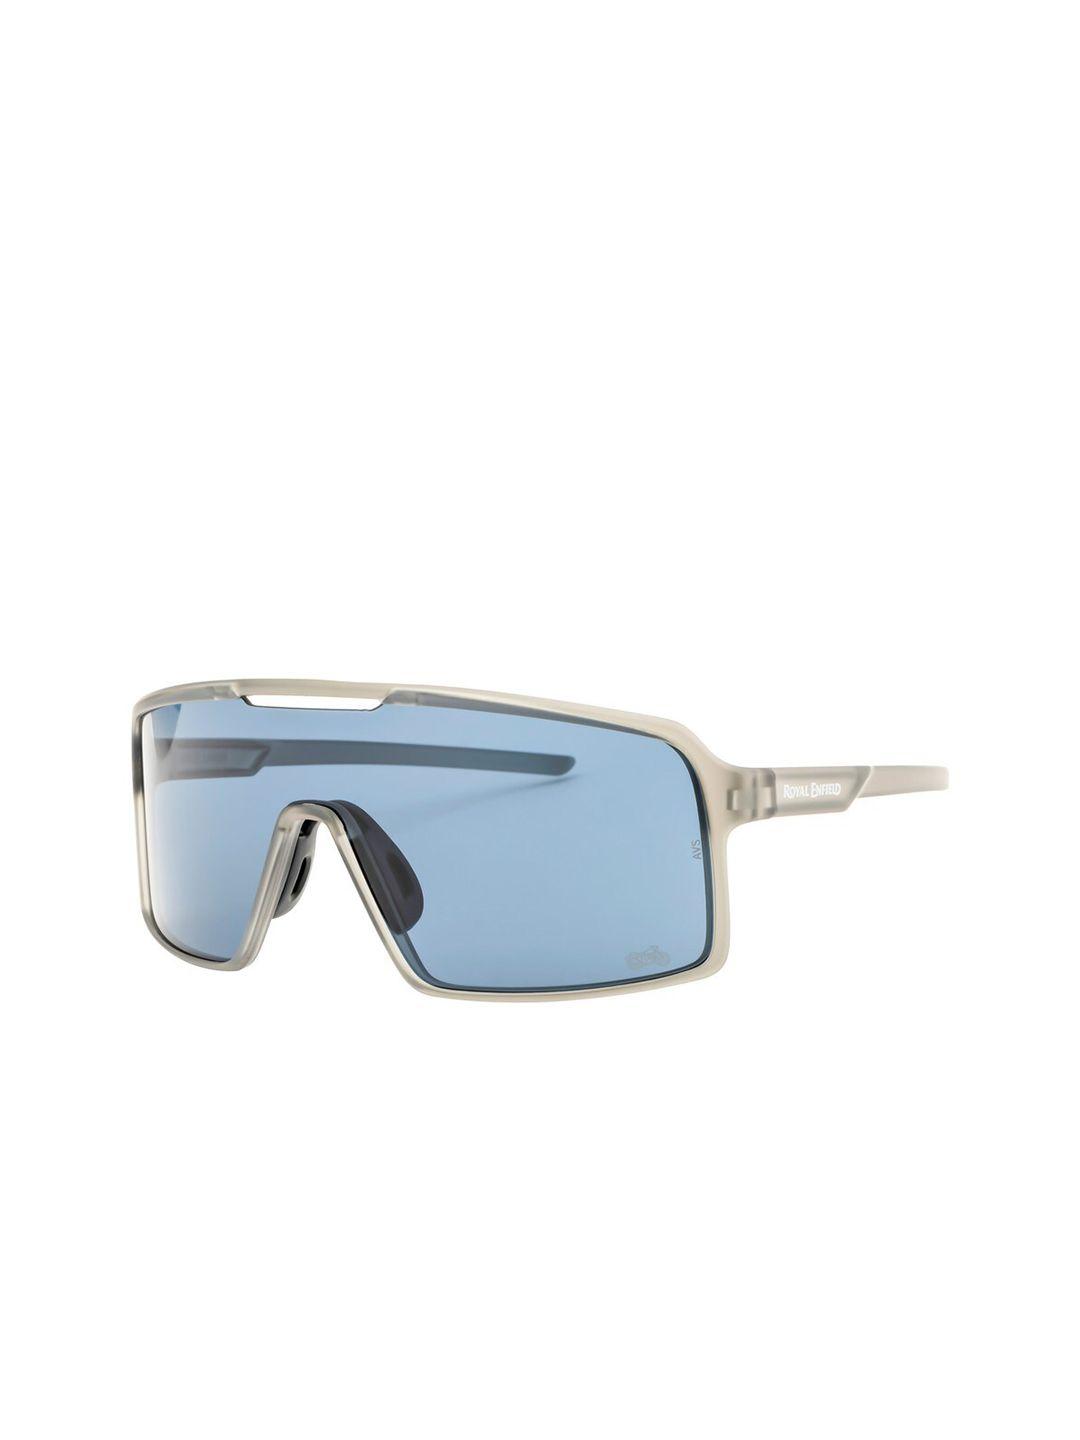 royal enfield men shield sunglasses with uv protected lens